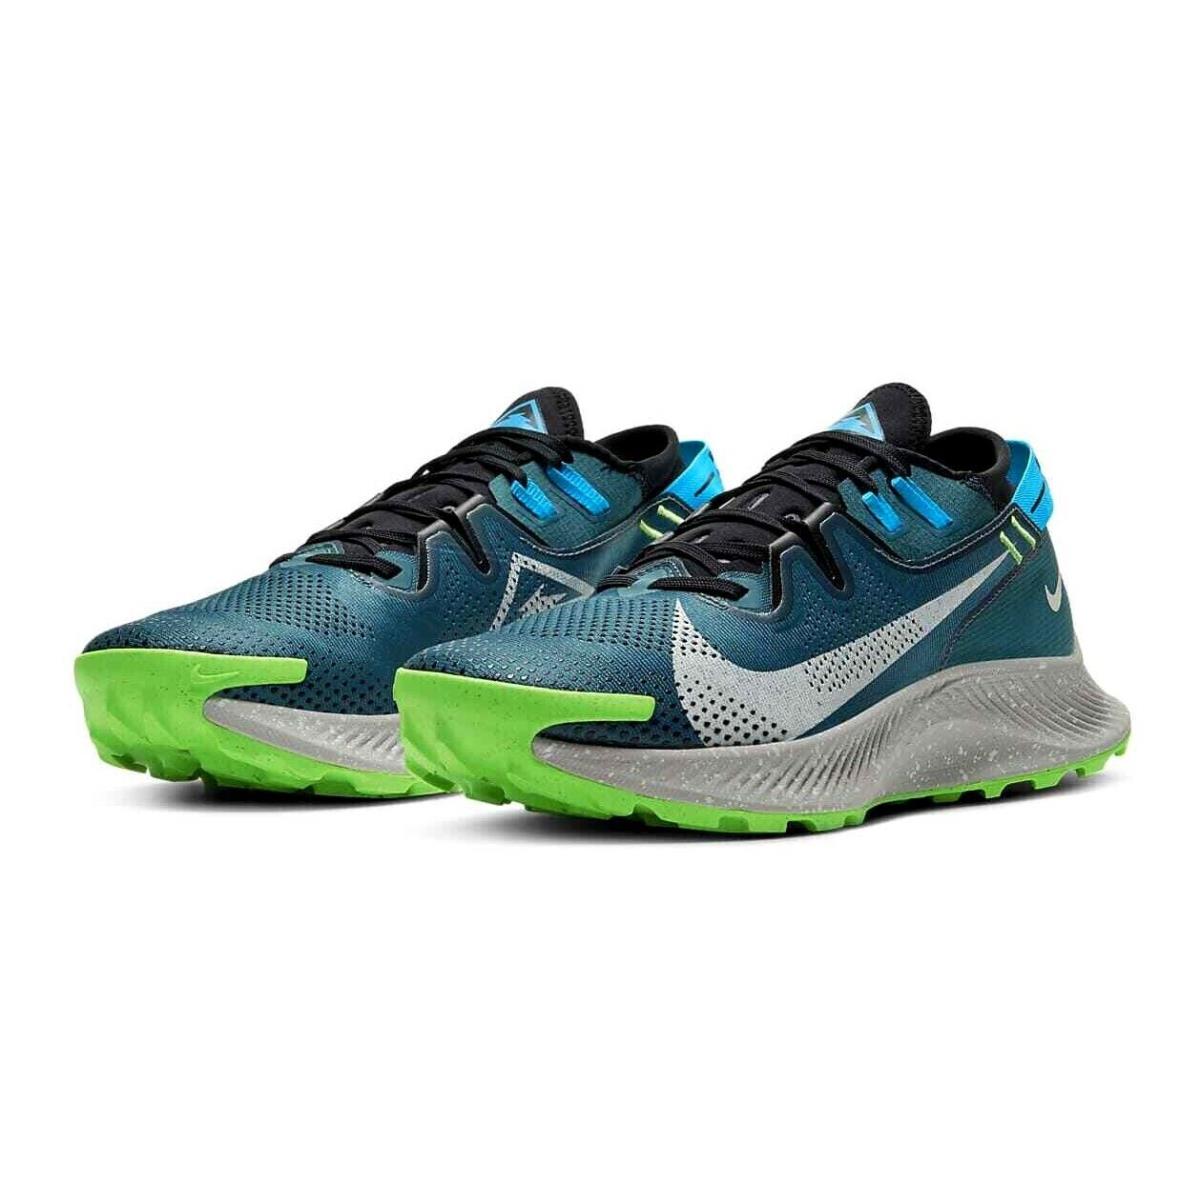 Nike Pegasus Trail 2 Mens Size 8 Sneakers Shoes CK4305 300 Teal Green Silver